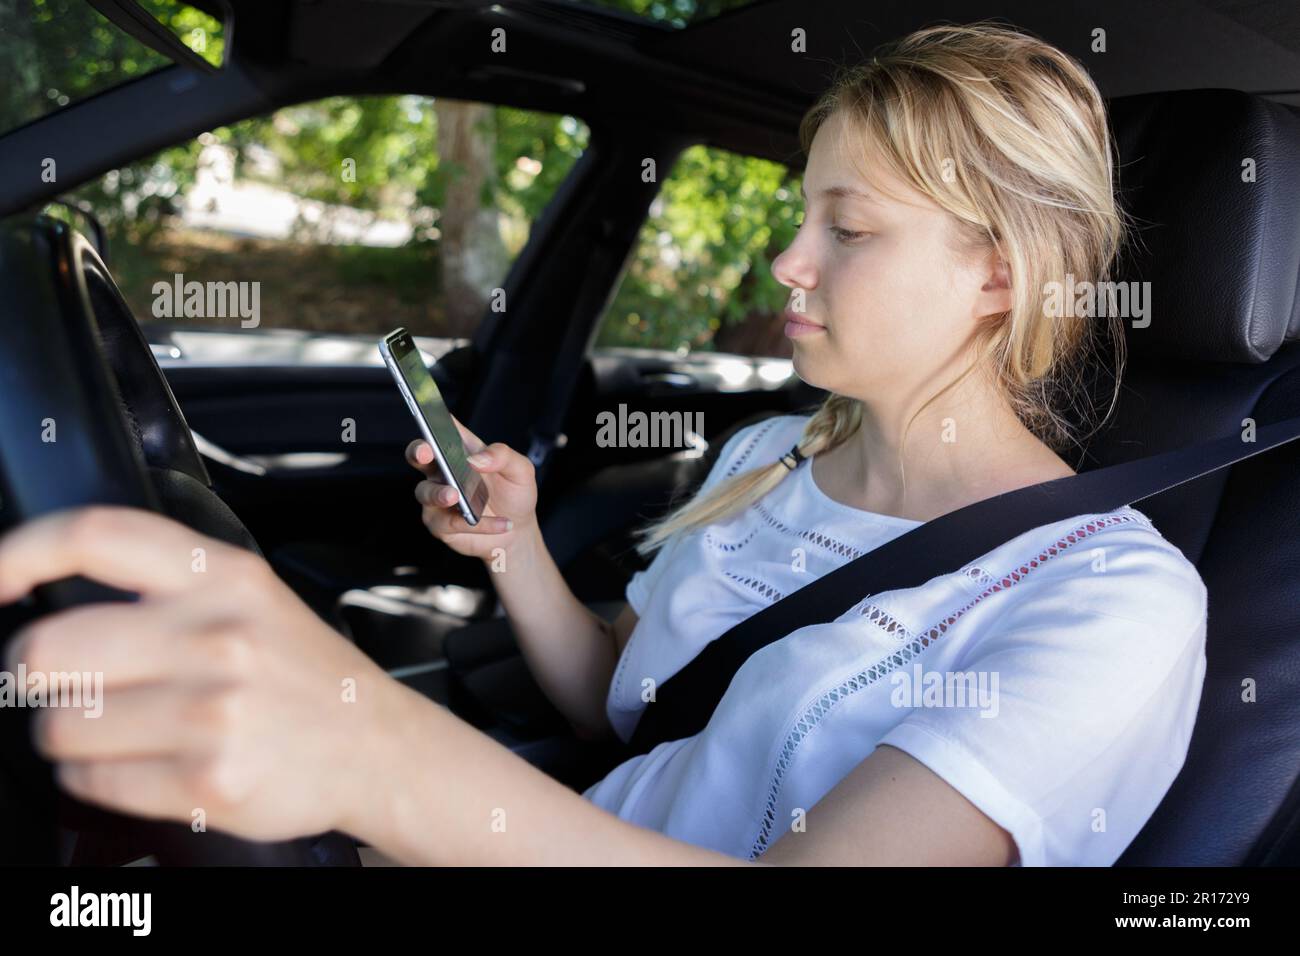 woman reading text while driving her car Stock Photo